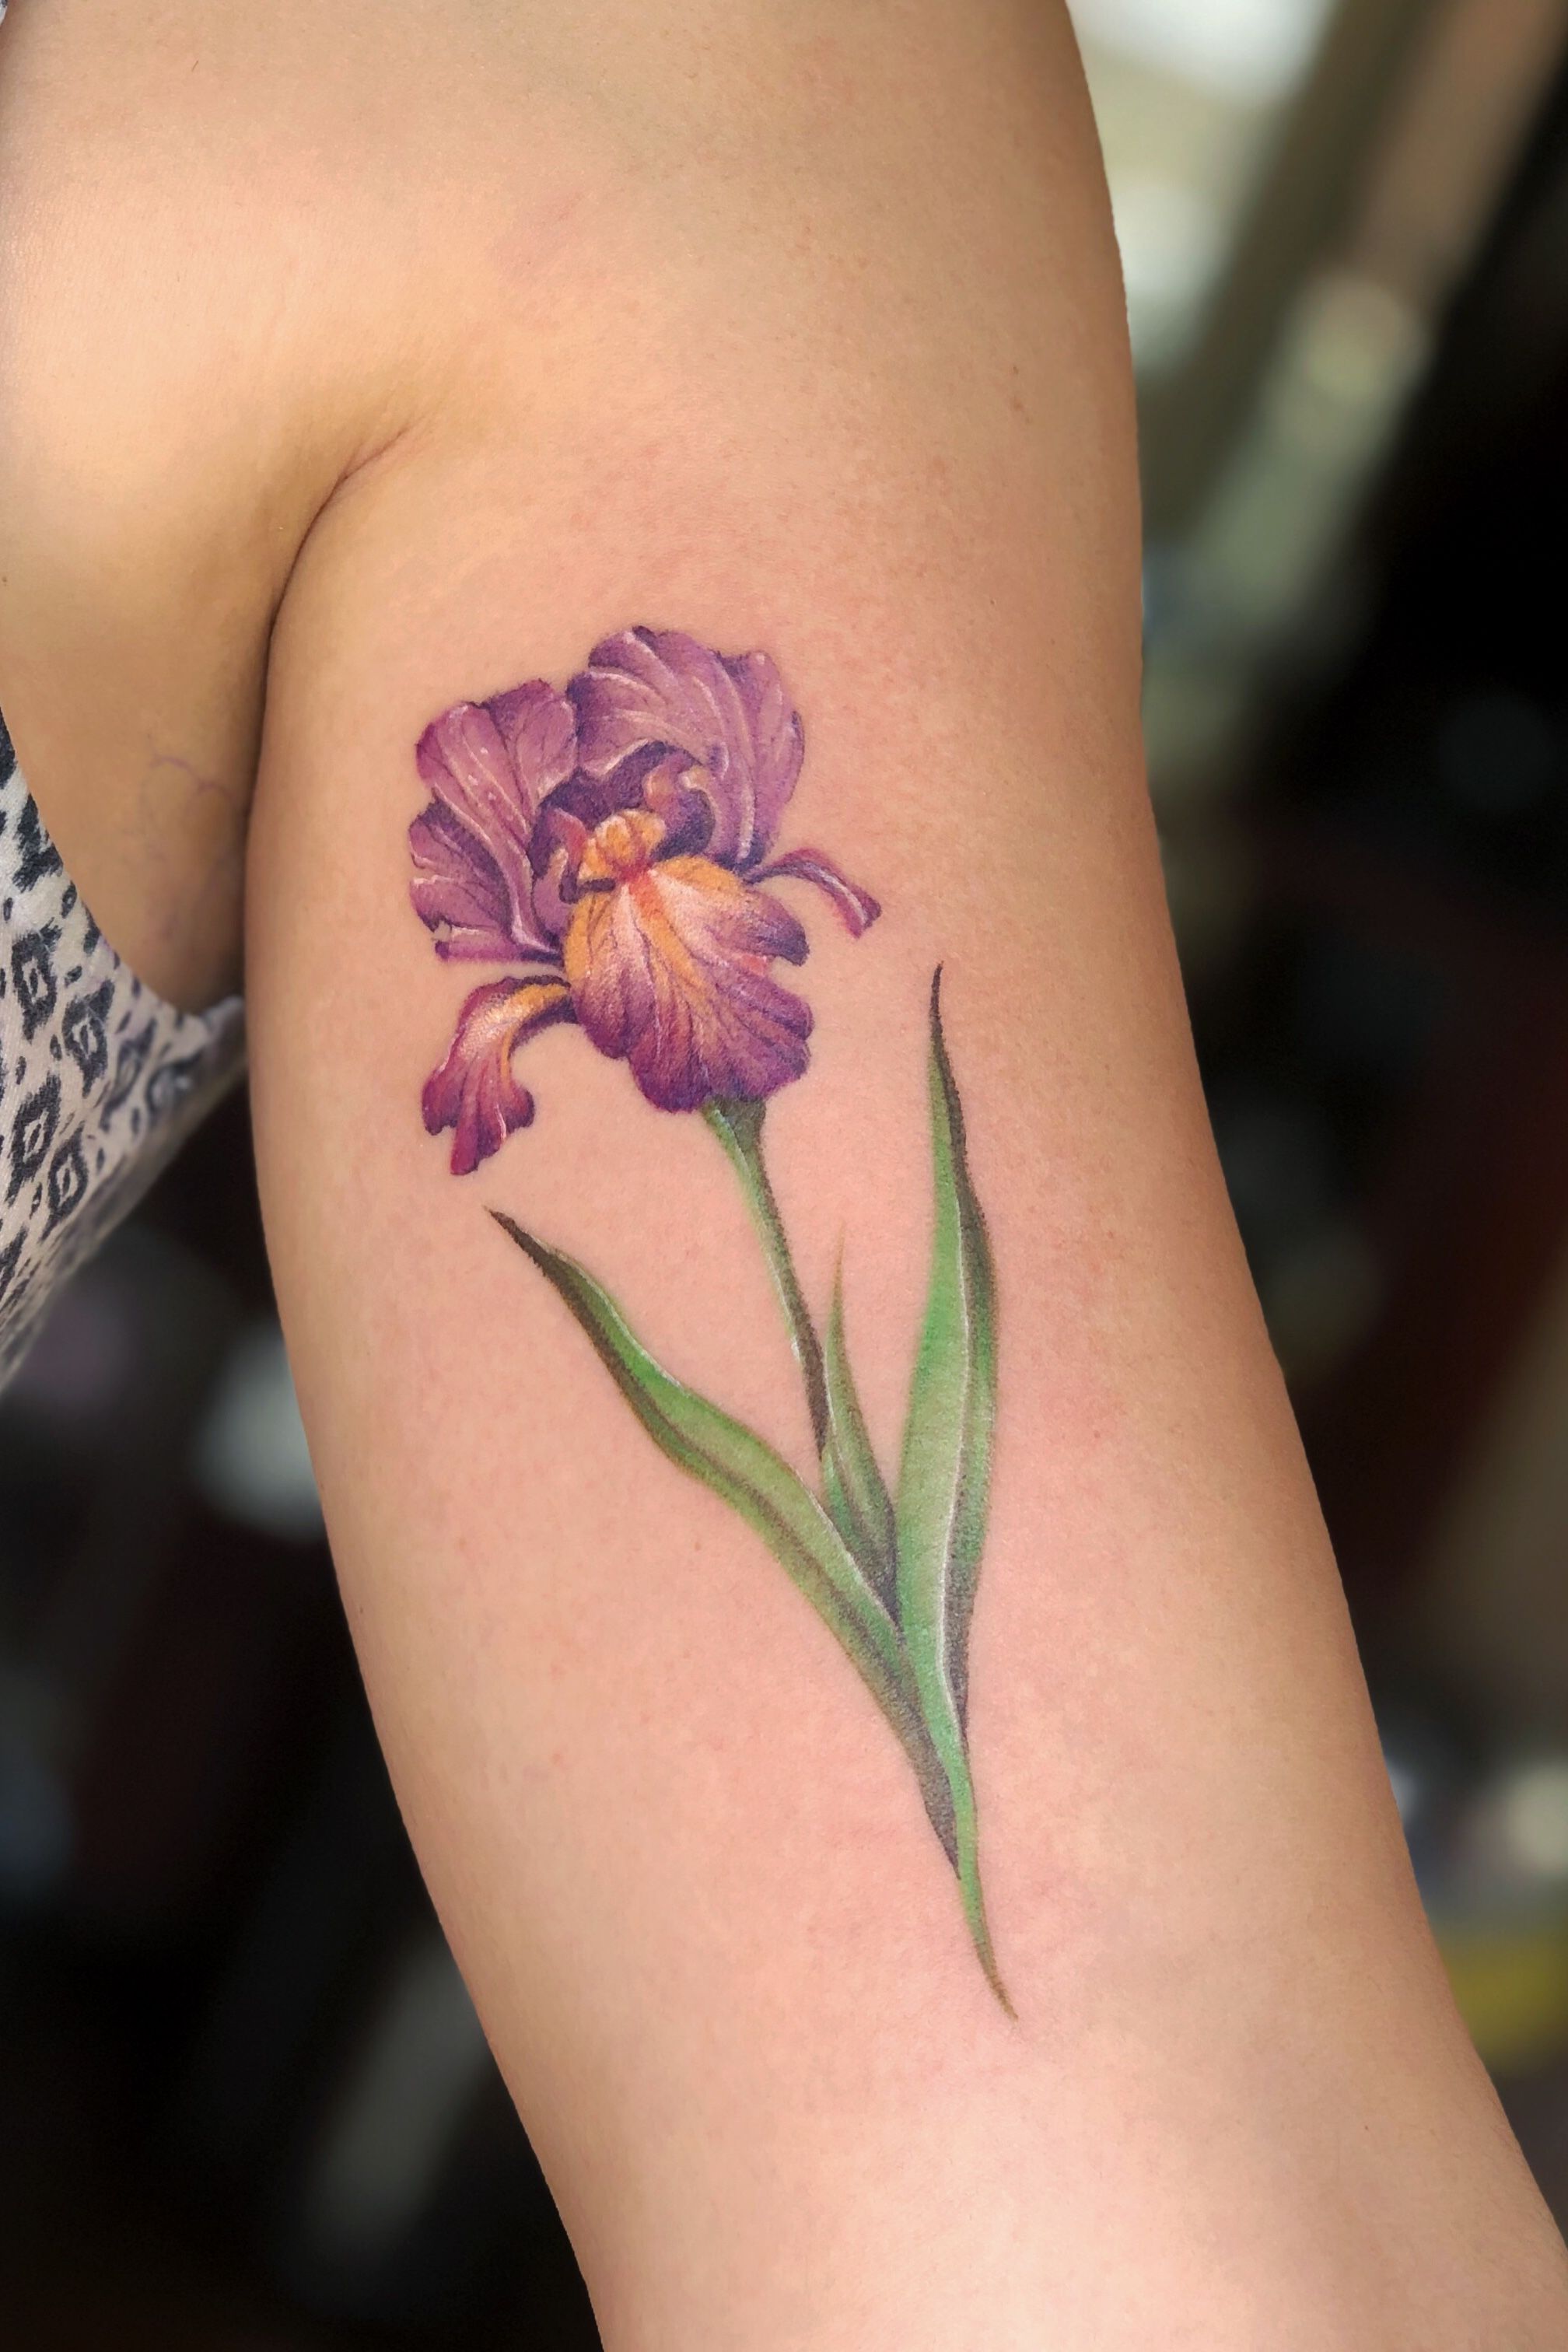 The Real Meaning Of An Iris Tattoo